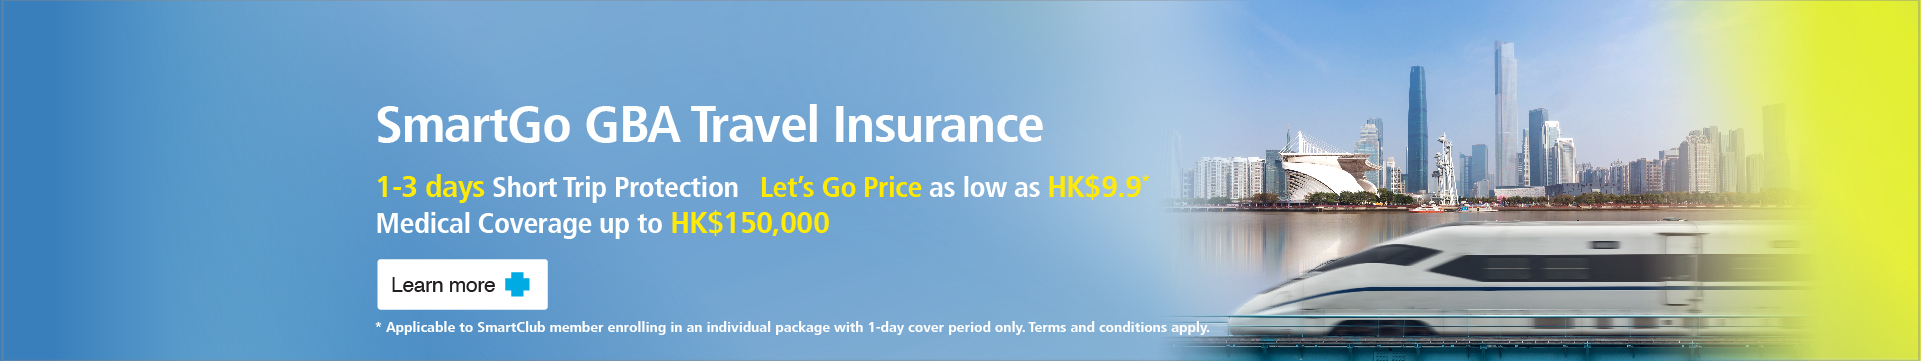 pacific blue cross travel medical insurance